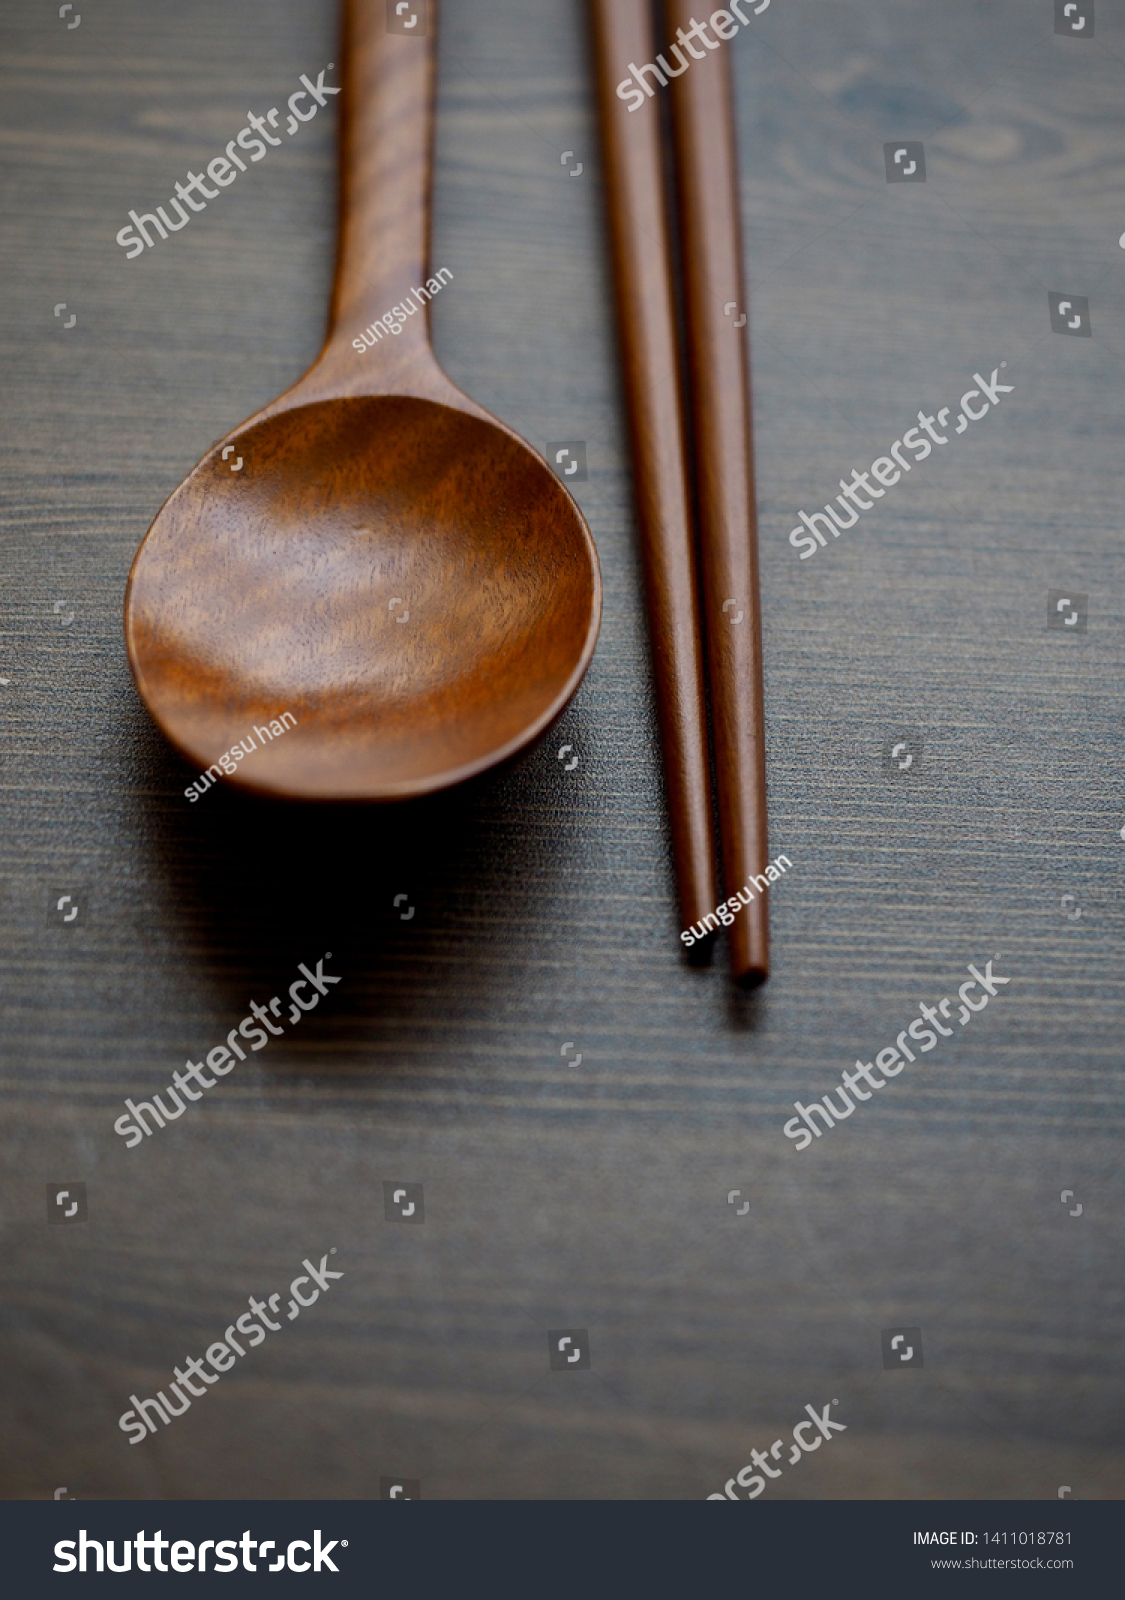 Wooden spoon, Wooden chopsticks and Wooden board background
 #1411018781